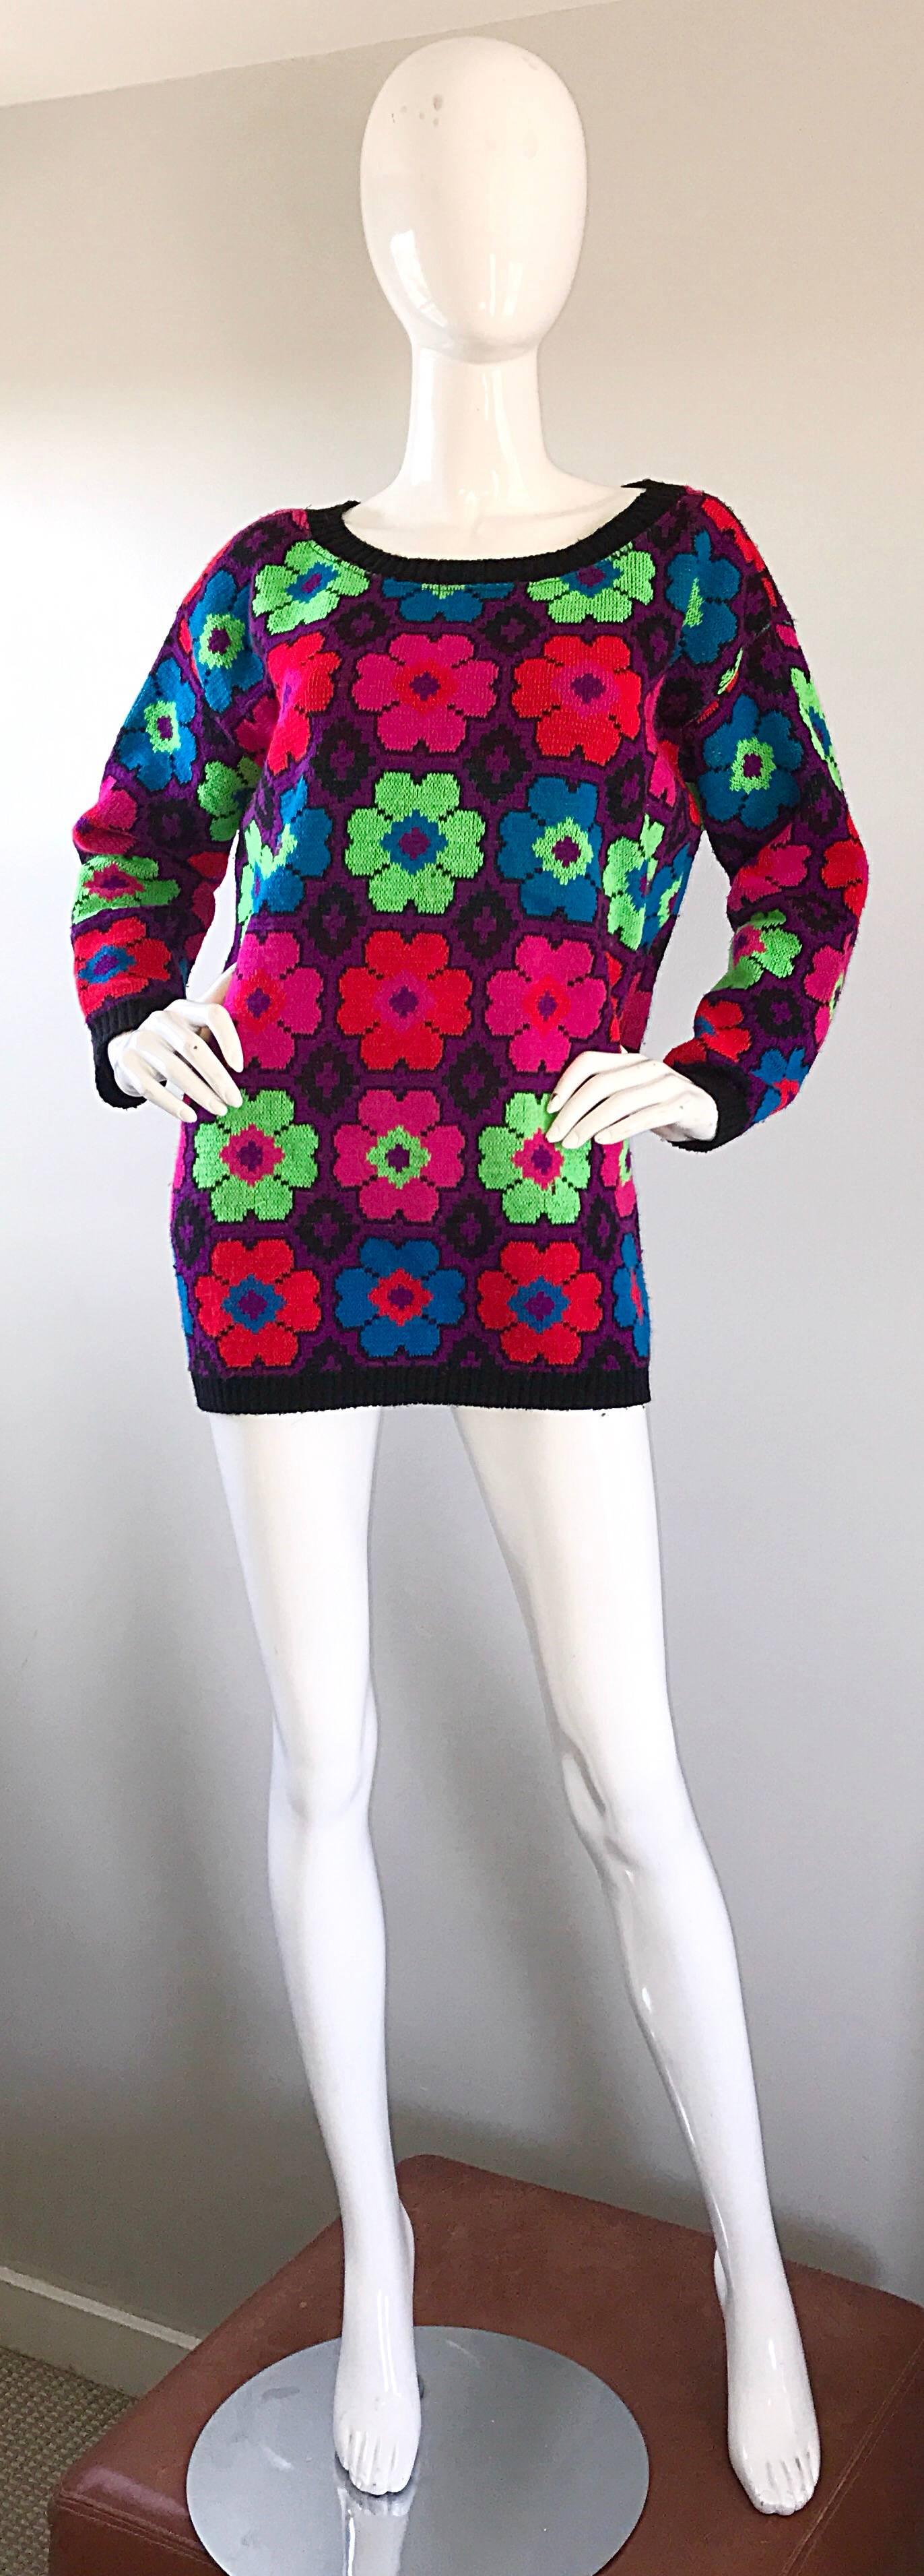 Amazing and rare vintage early 80s BETSEY JOHNSON PUNK LABEL bright sweater! Features intarsia woven neon flowers in vibrant hues of hot pink, neon green, red, purple, blue and black throughout. A fun piece to throw on witha. Pair of jeans or